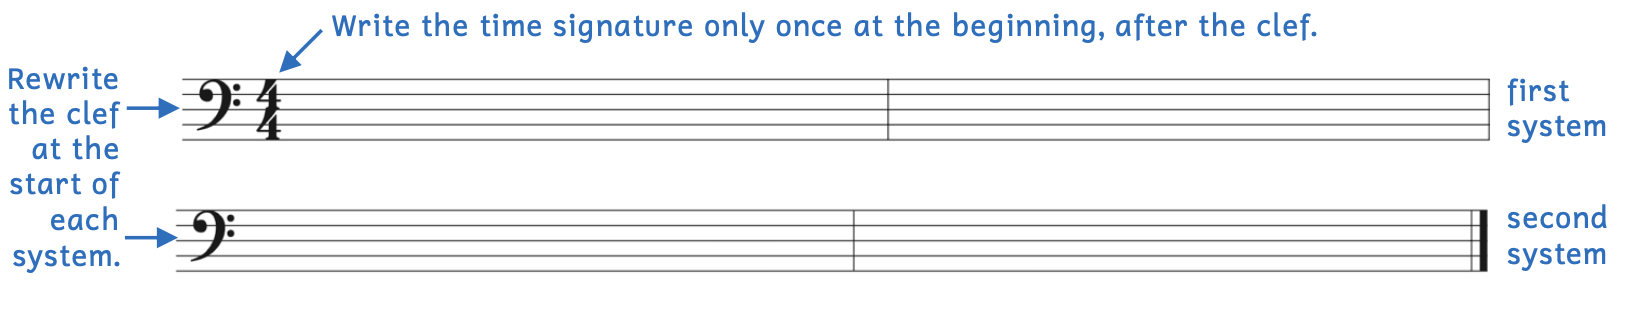 Write the clef at the start of each system. The first line is called the first system and the second line is called the second system. The clef is written before the time signature. Write the time signature only once at the beginning, after the clef.